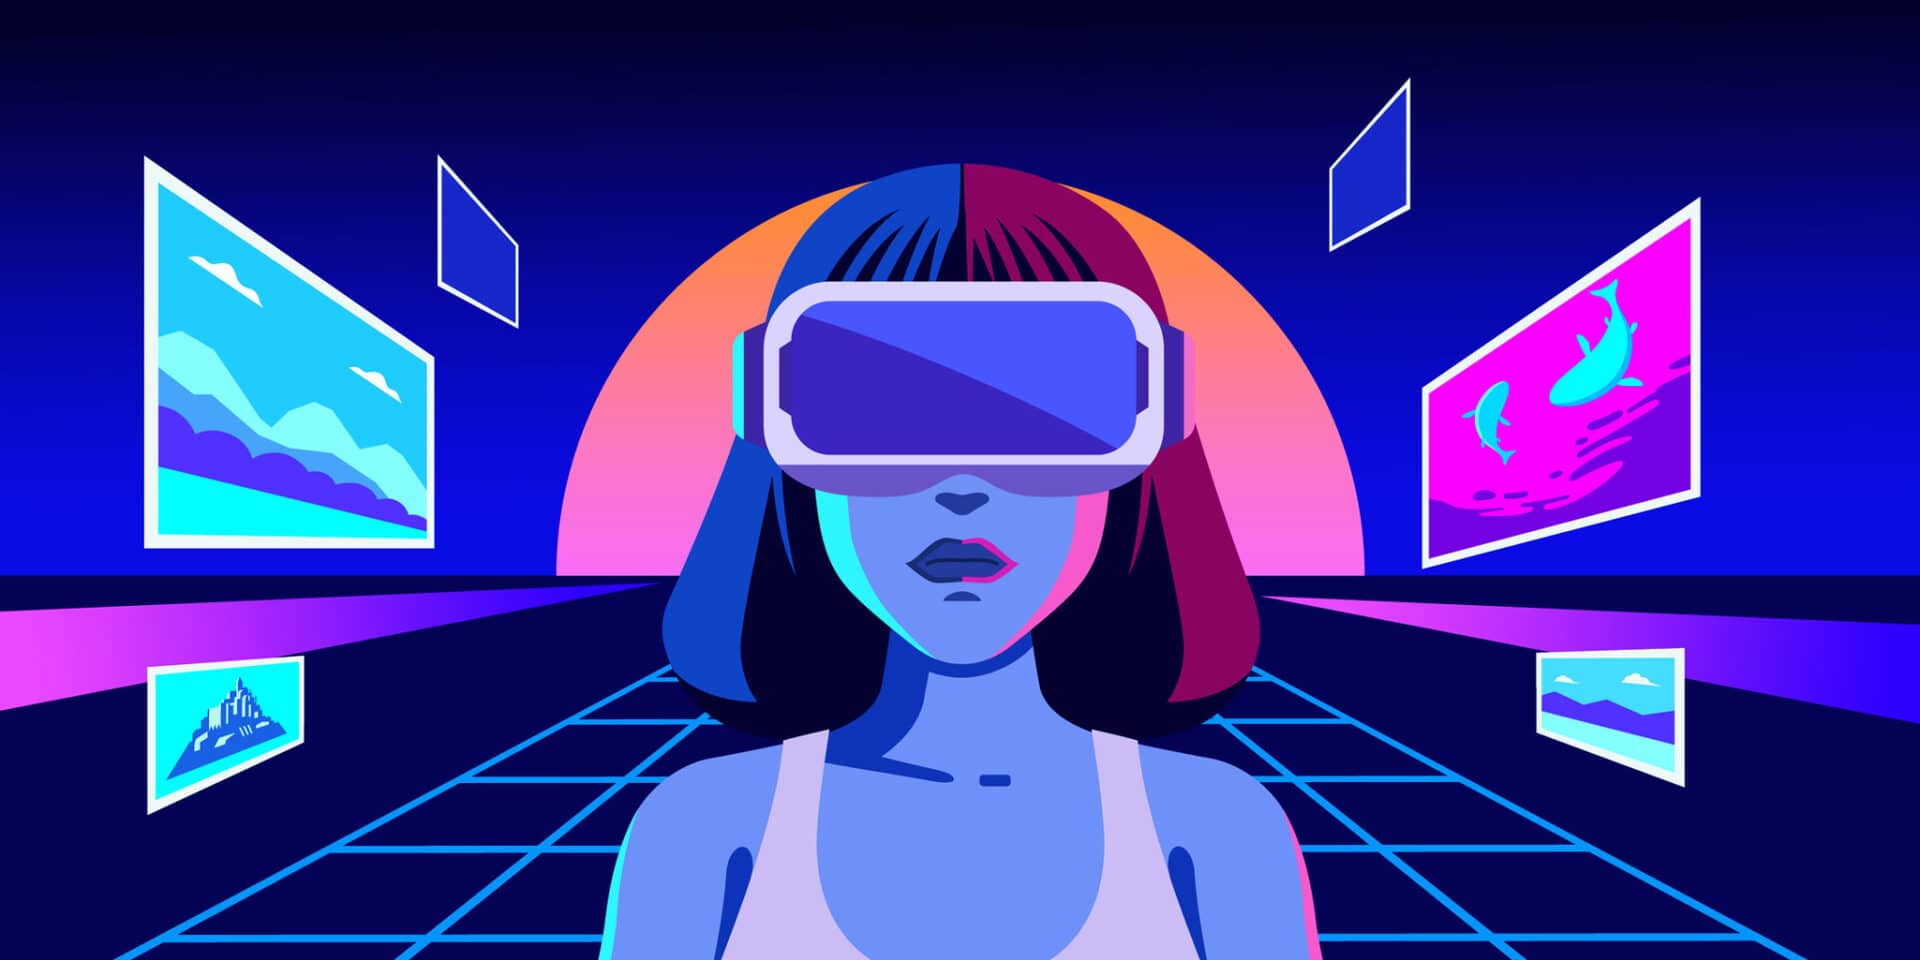 The Metaverse: All you want to know about the Metaverse